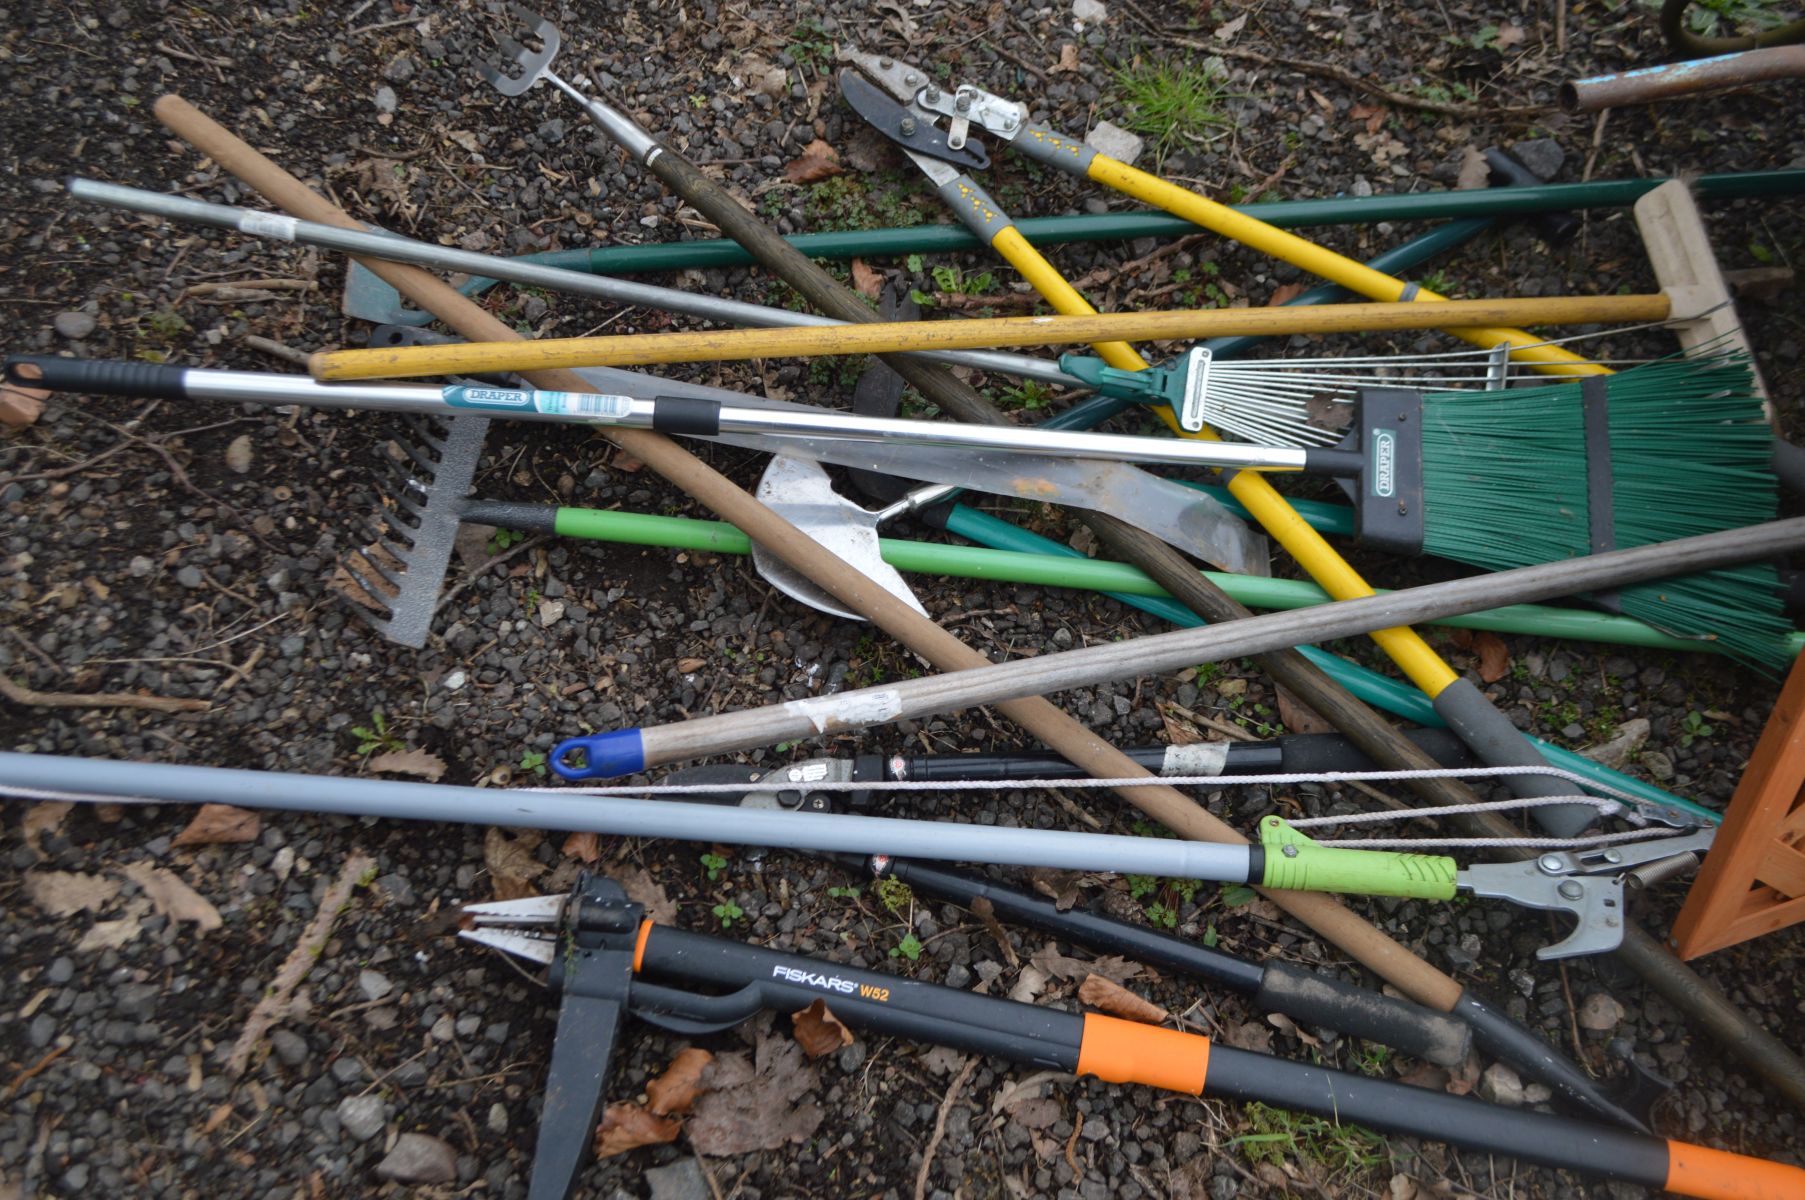 A QUANTITY OF GARDEN TOOLS to include a lopper, de-weeder, rake, broom, shears etc together with a - Image 2 of 4